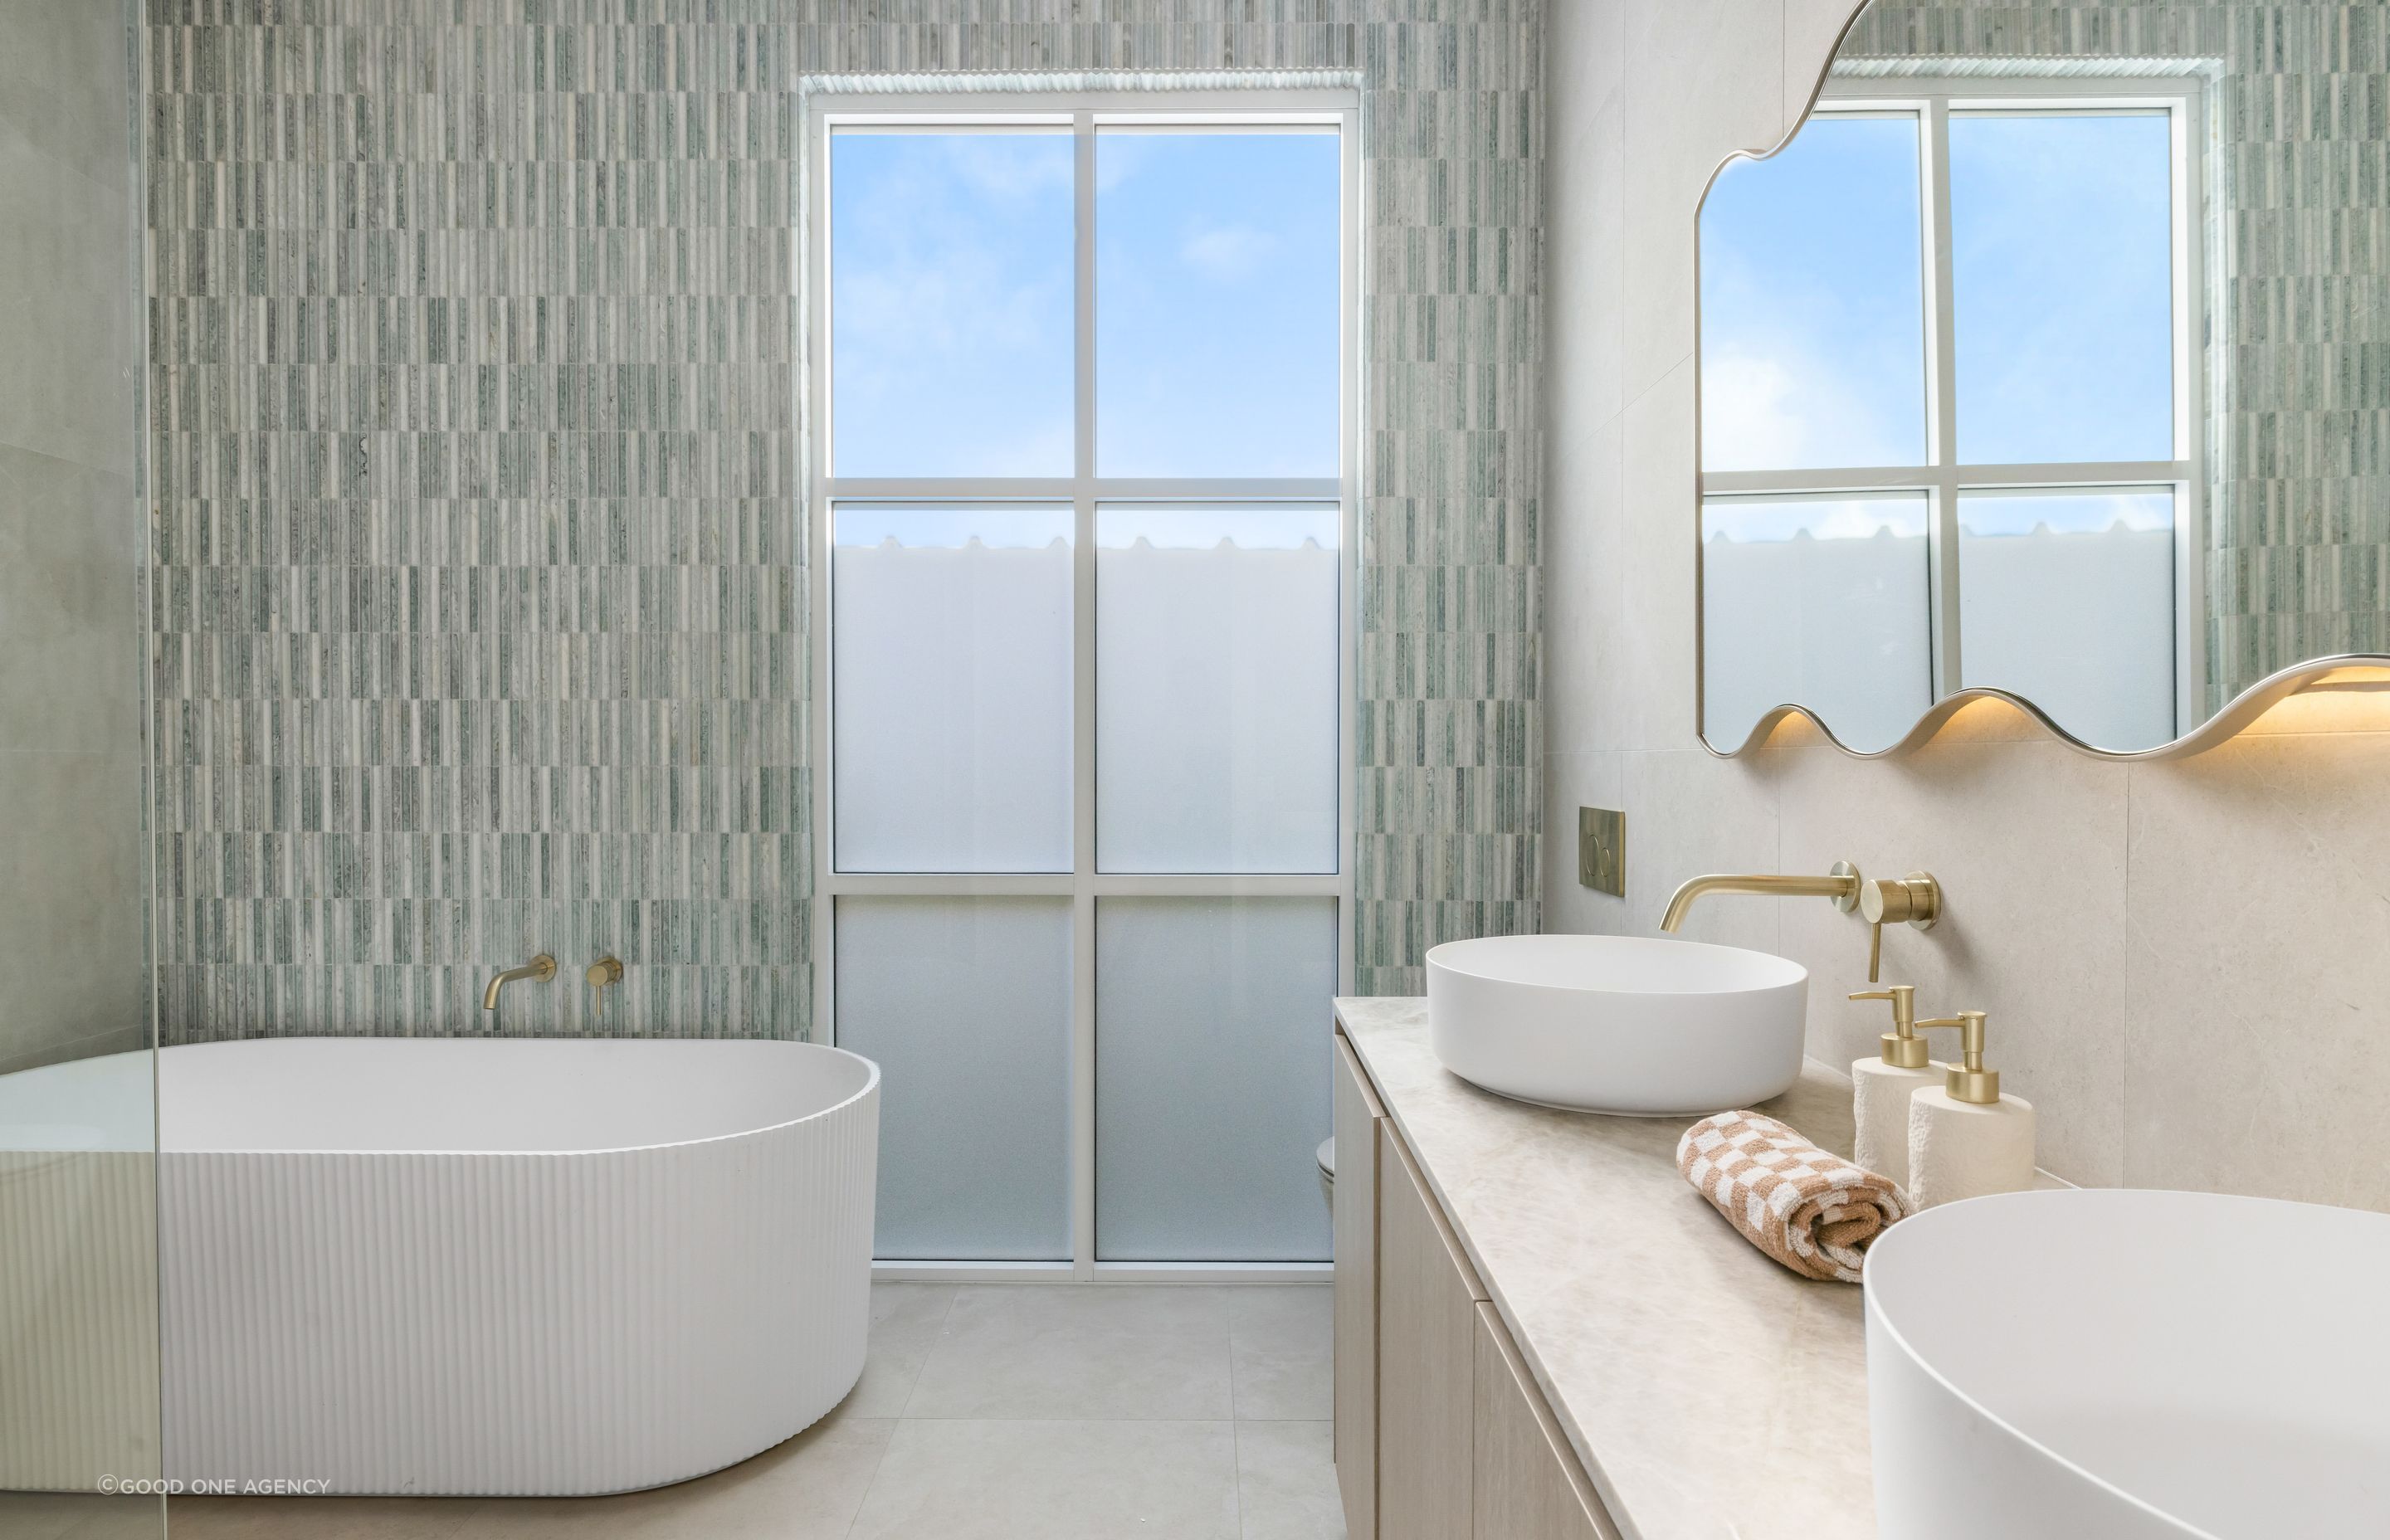 The main bathroom features a fluted porcelain tub and a pop of subtle colour in the green Moroccan tile feature wall.